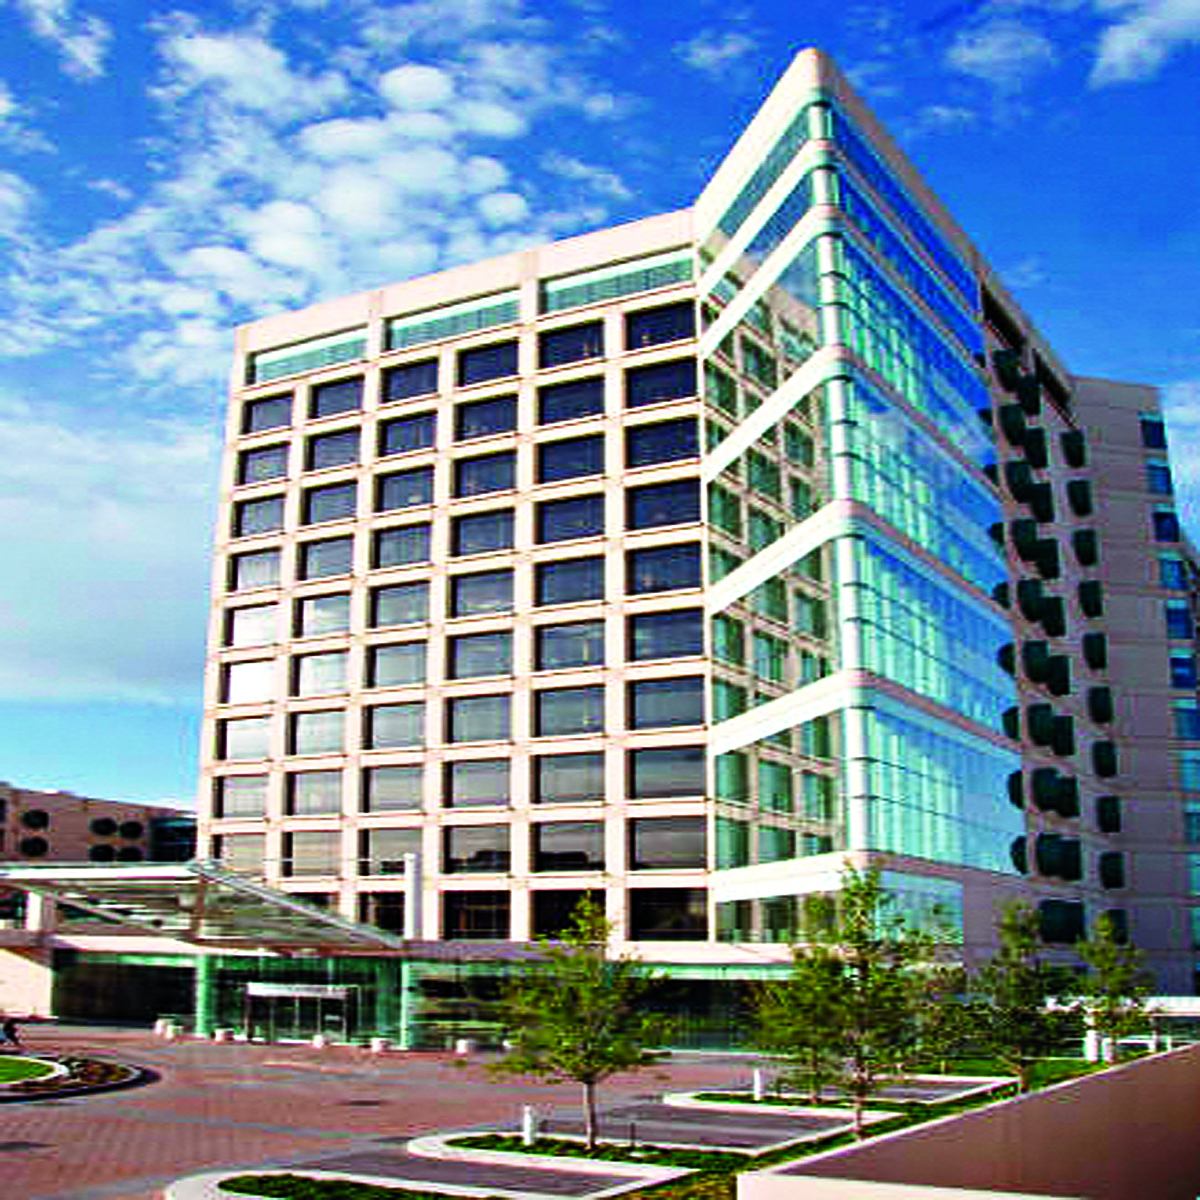 T. Boone Pickens Medical Center